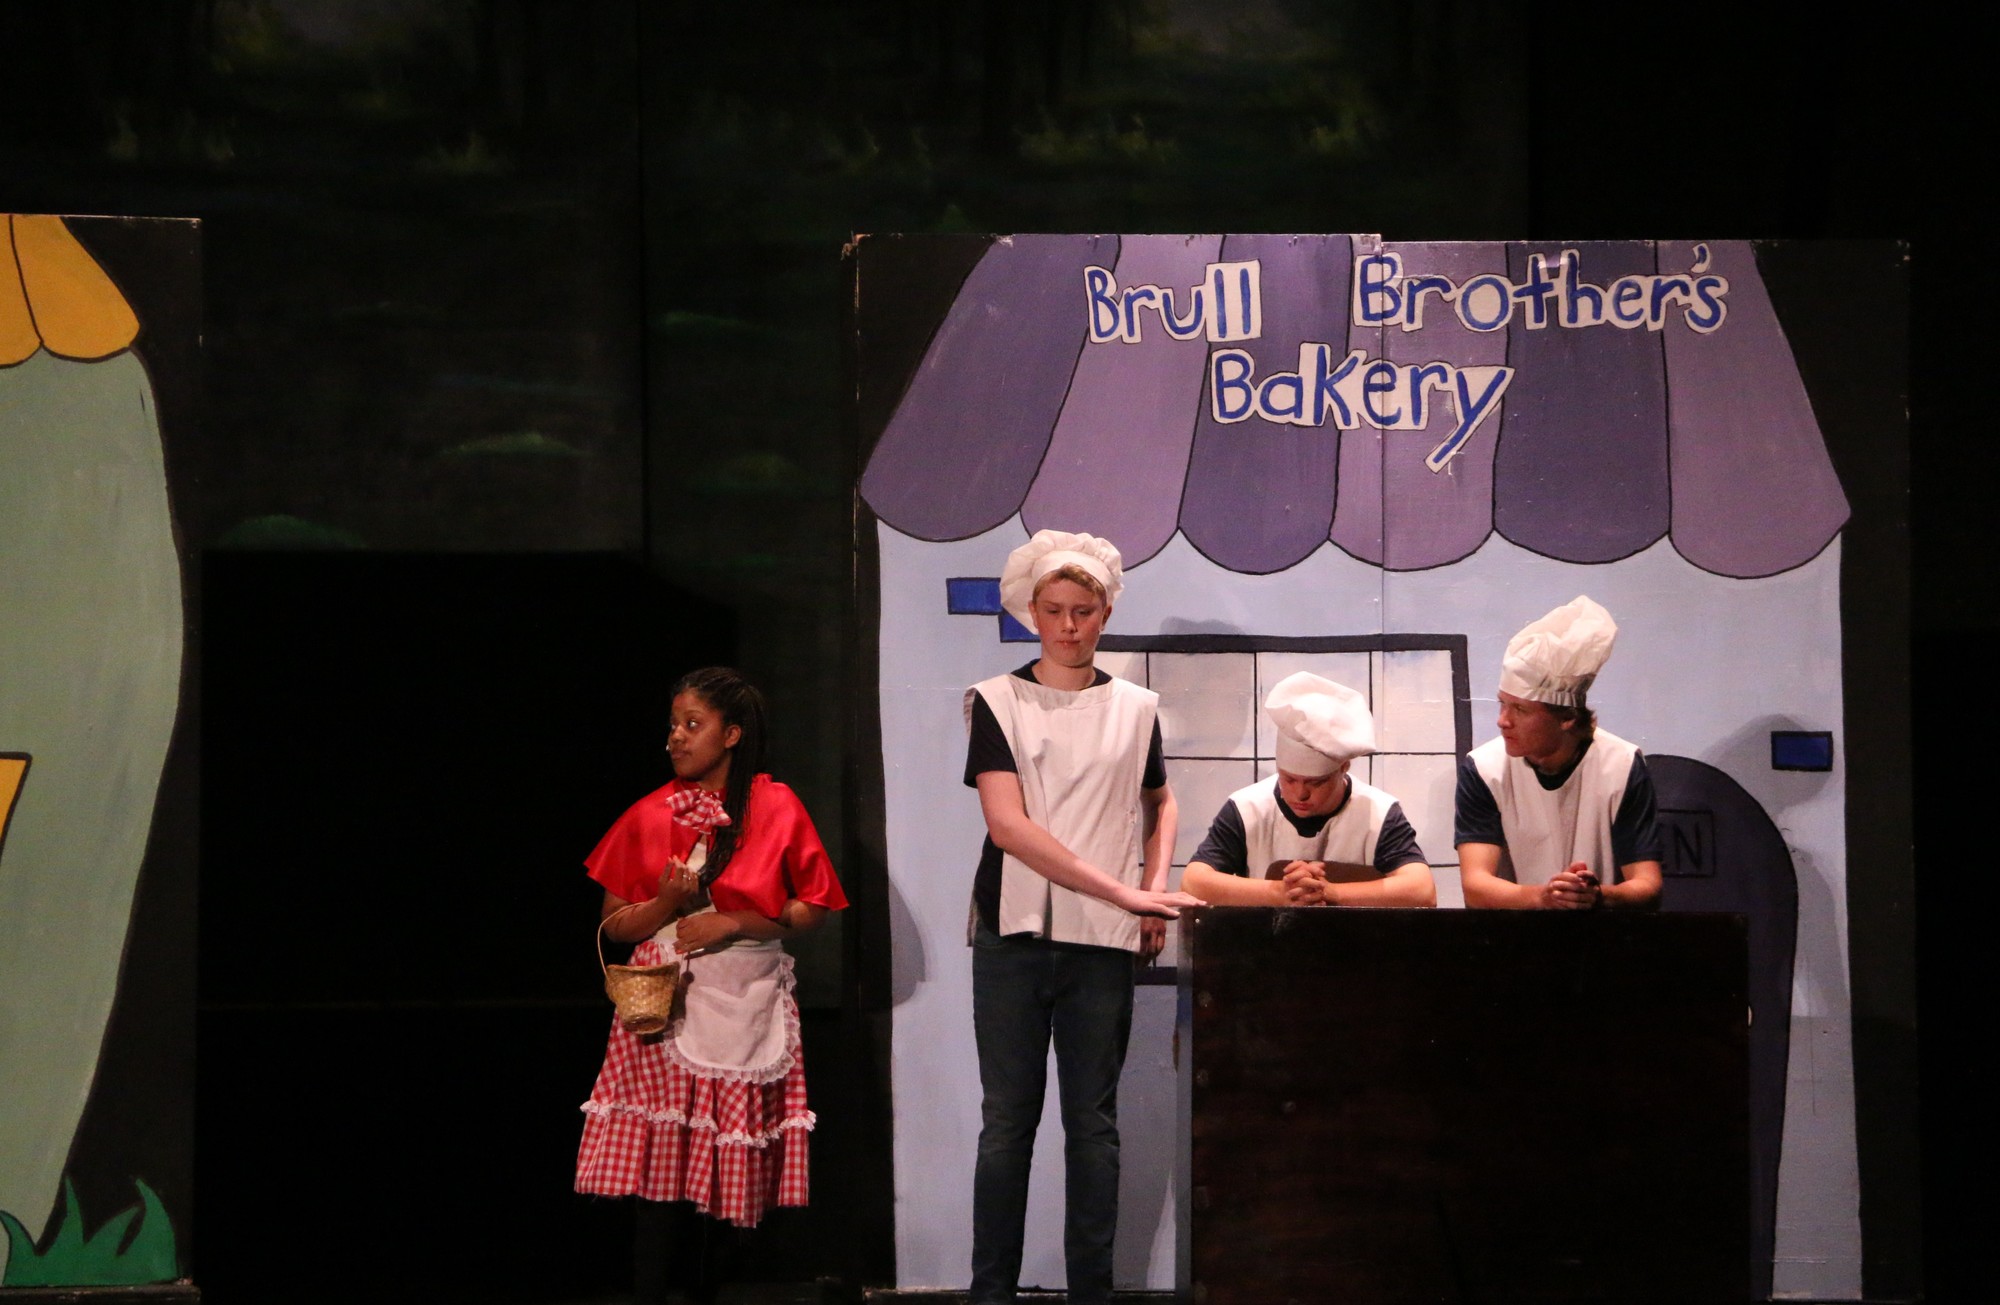 Little Red Riding Hood, played by Tazhane Griffiths, at the Brull Brothers Bakery with Alex Johnson (Tommy Brull), left, Danny Collins (Jack Brull) and Connor Griffin (Martin Brull).